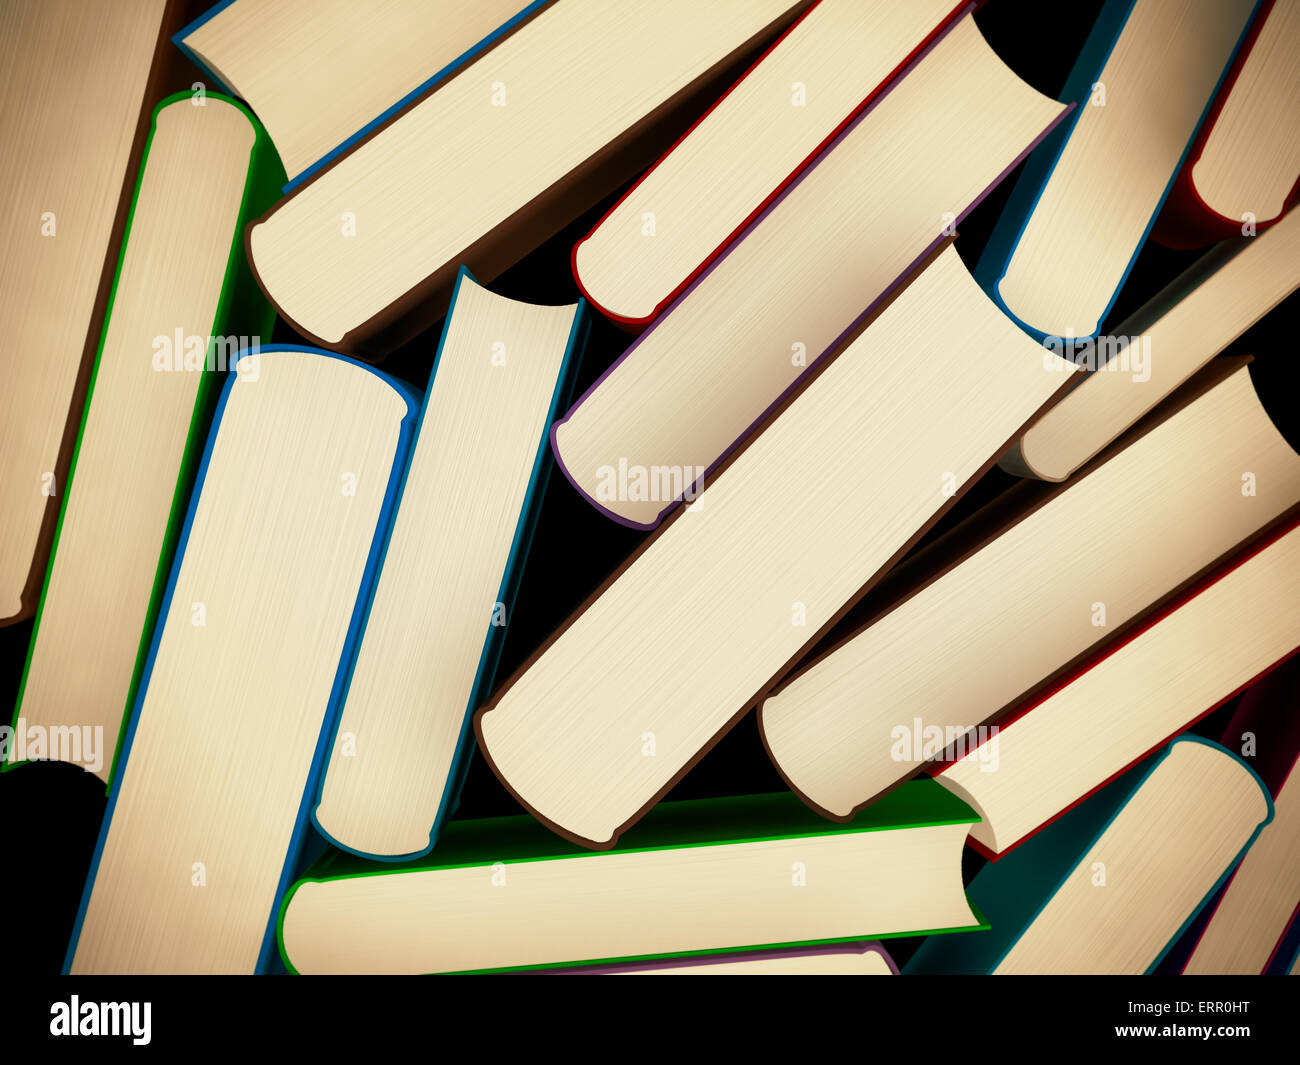 Heap of old books in a hard cover with toning, 3d illustration Stock Photo